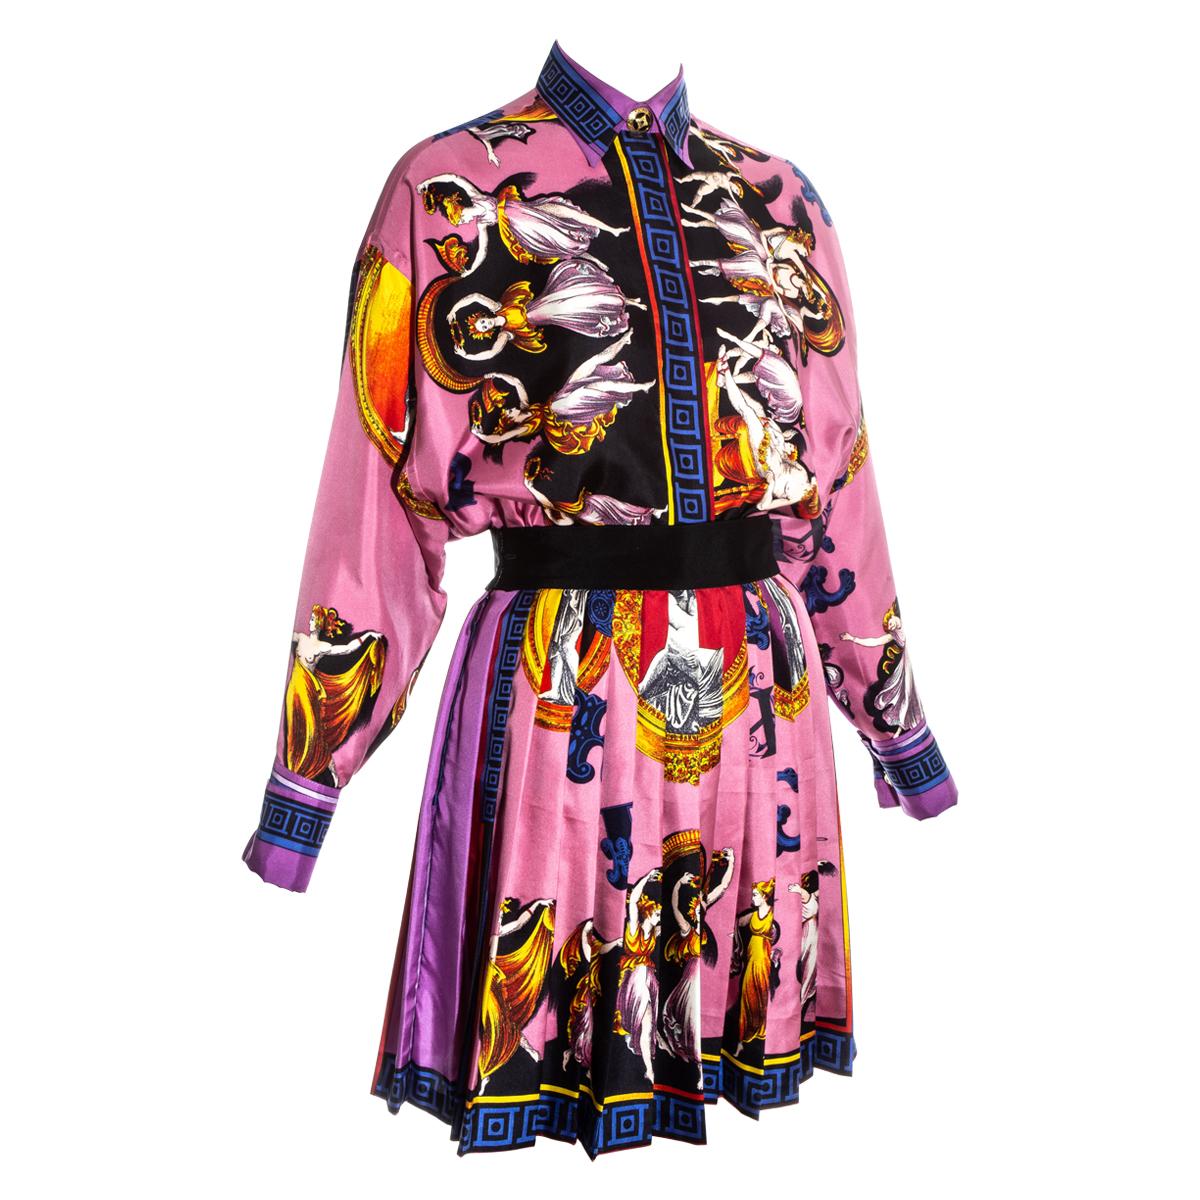 Gianni Versace pink neoclassical printed silk skirt suit, fw 1991